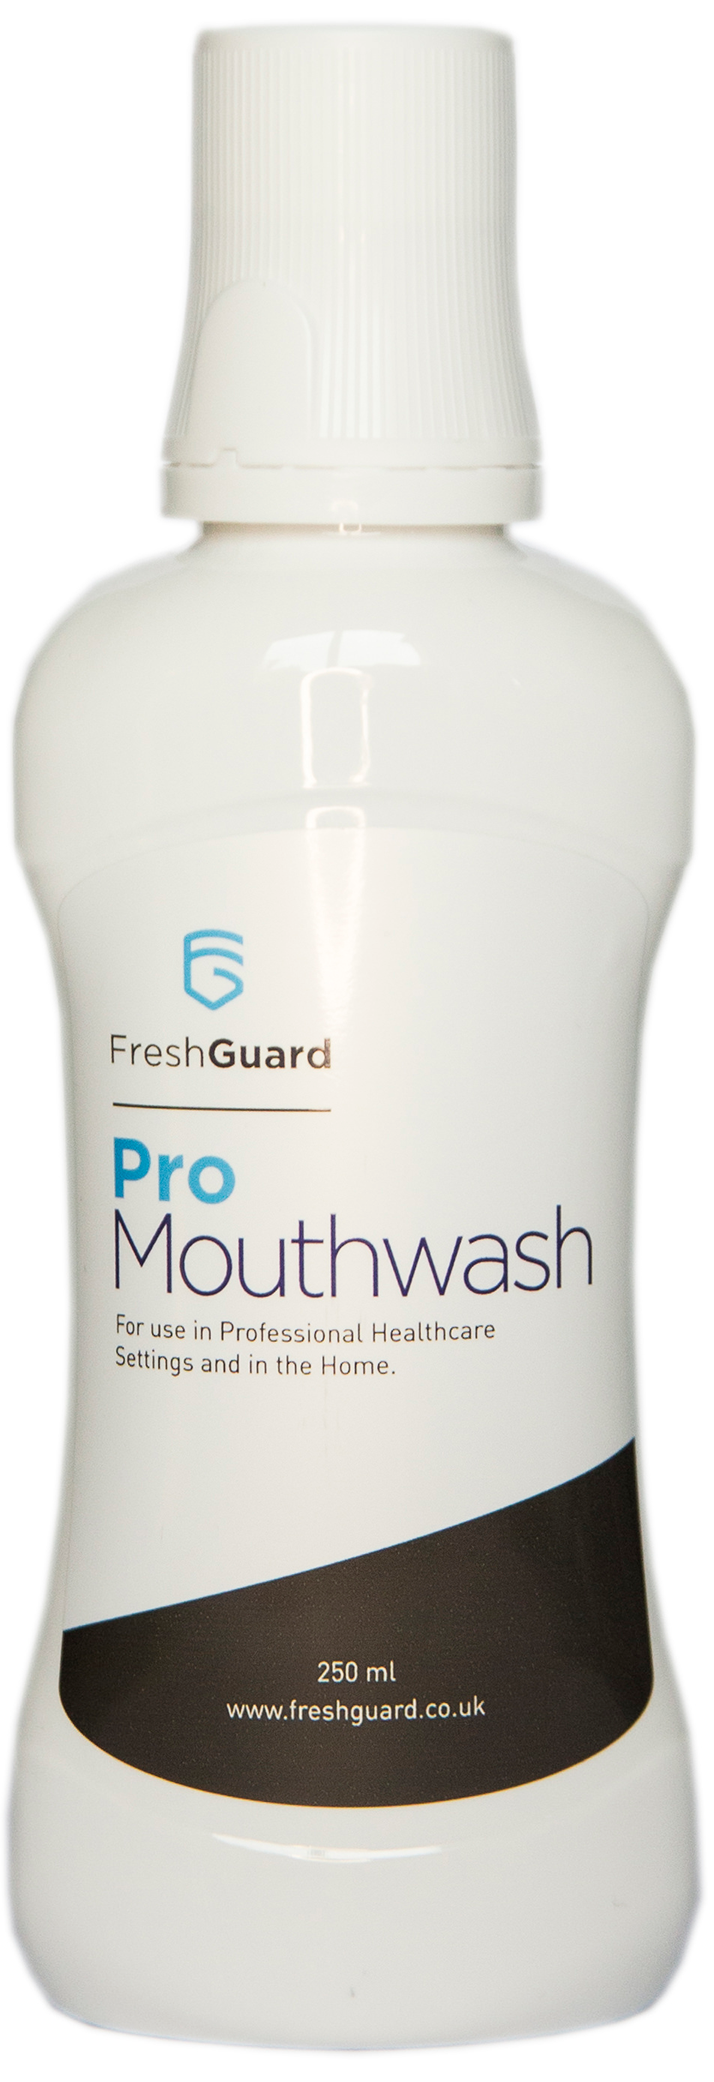 FreshGuard Pro-Mouthwash. For use in Professional Healthcare Settings and in the Home.